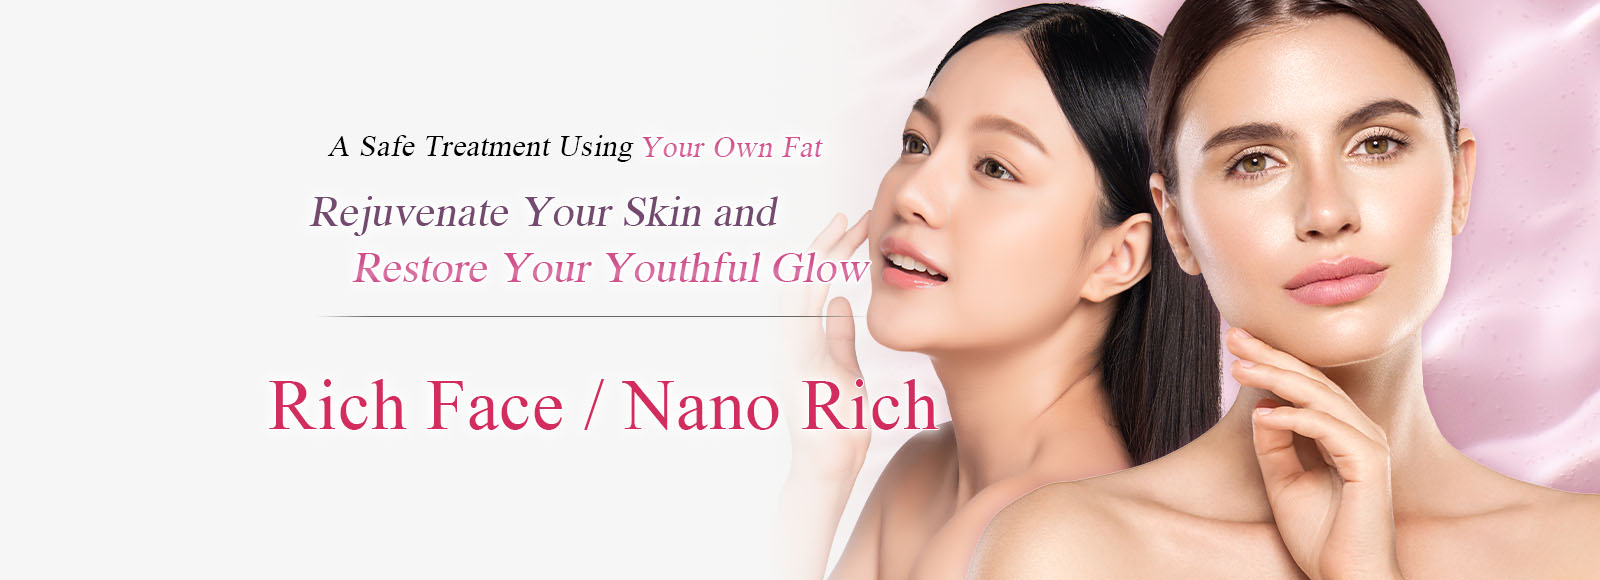 Rejuvenate your skin and restore your youthful glow rich face / nano face